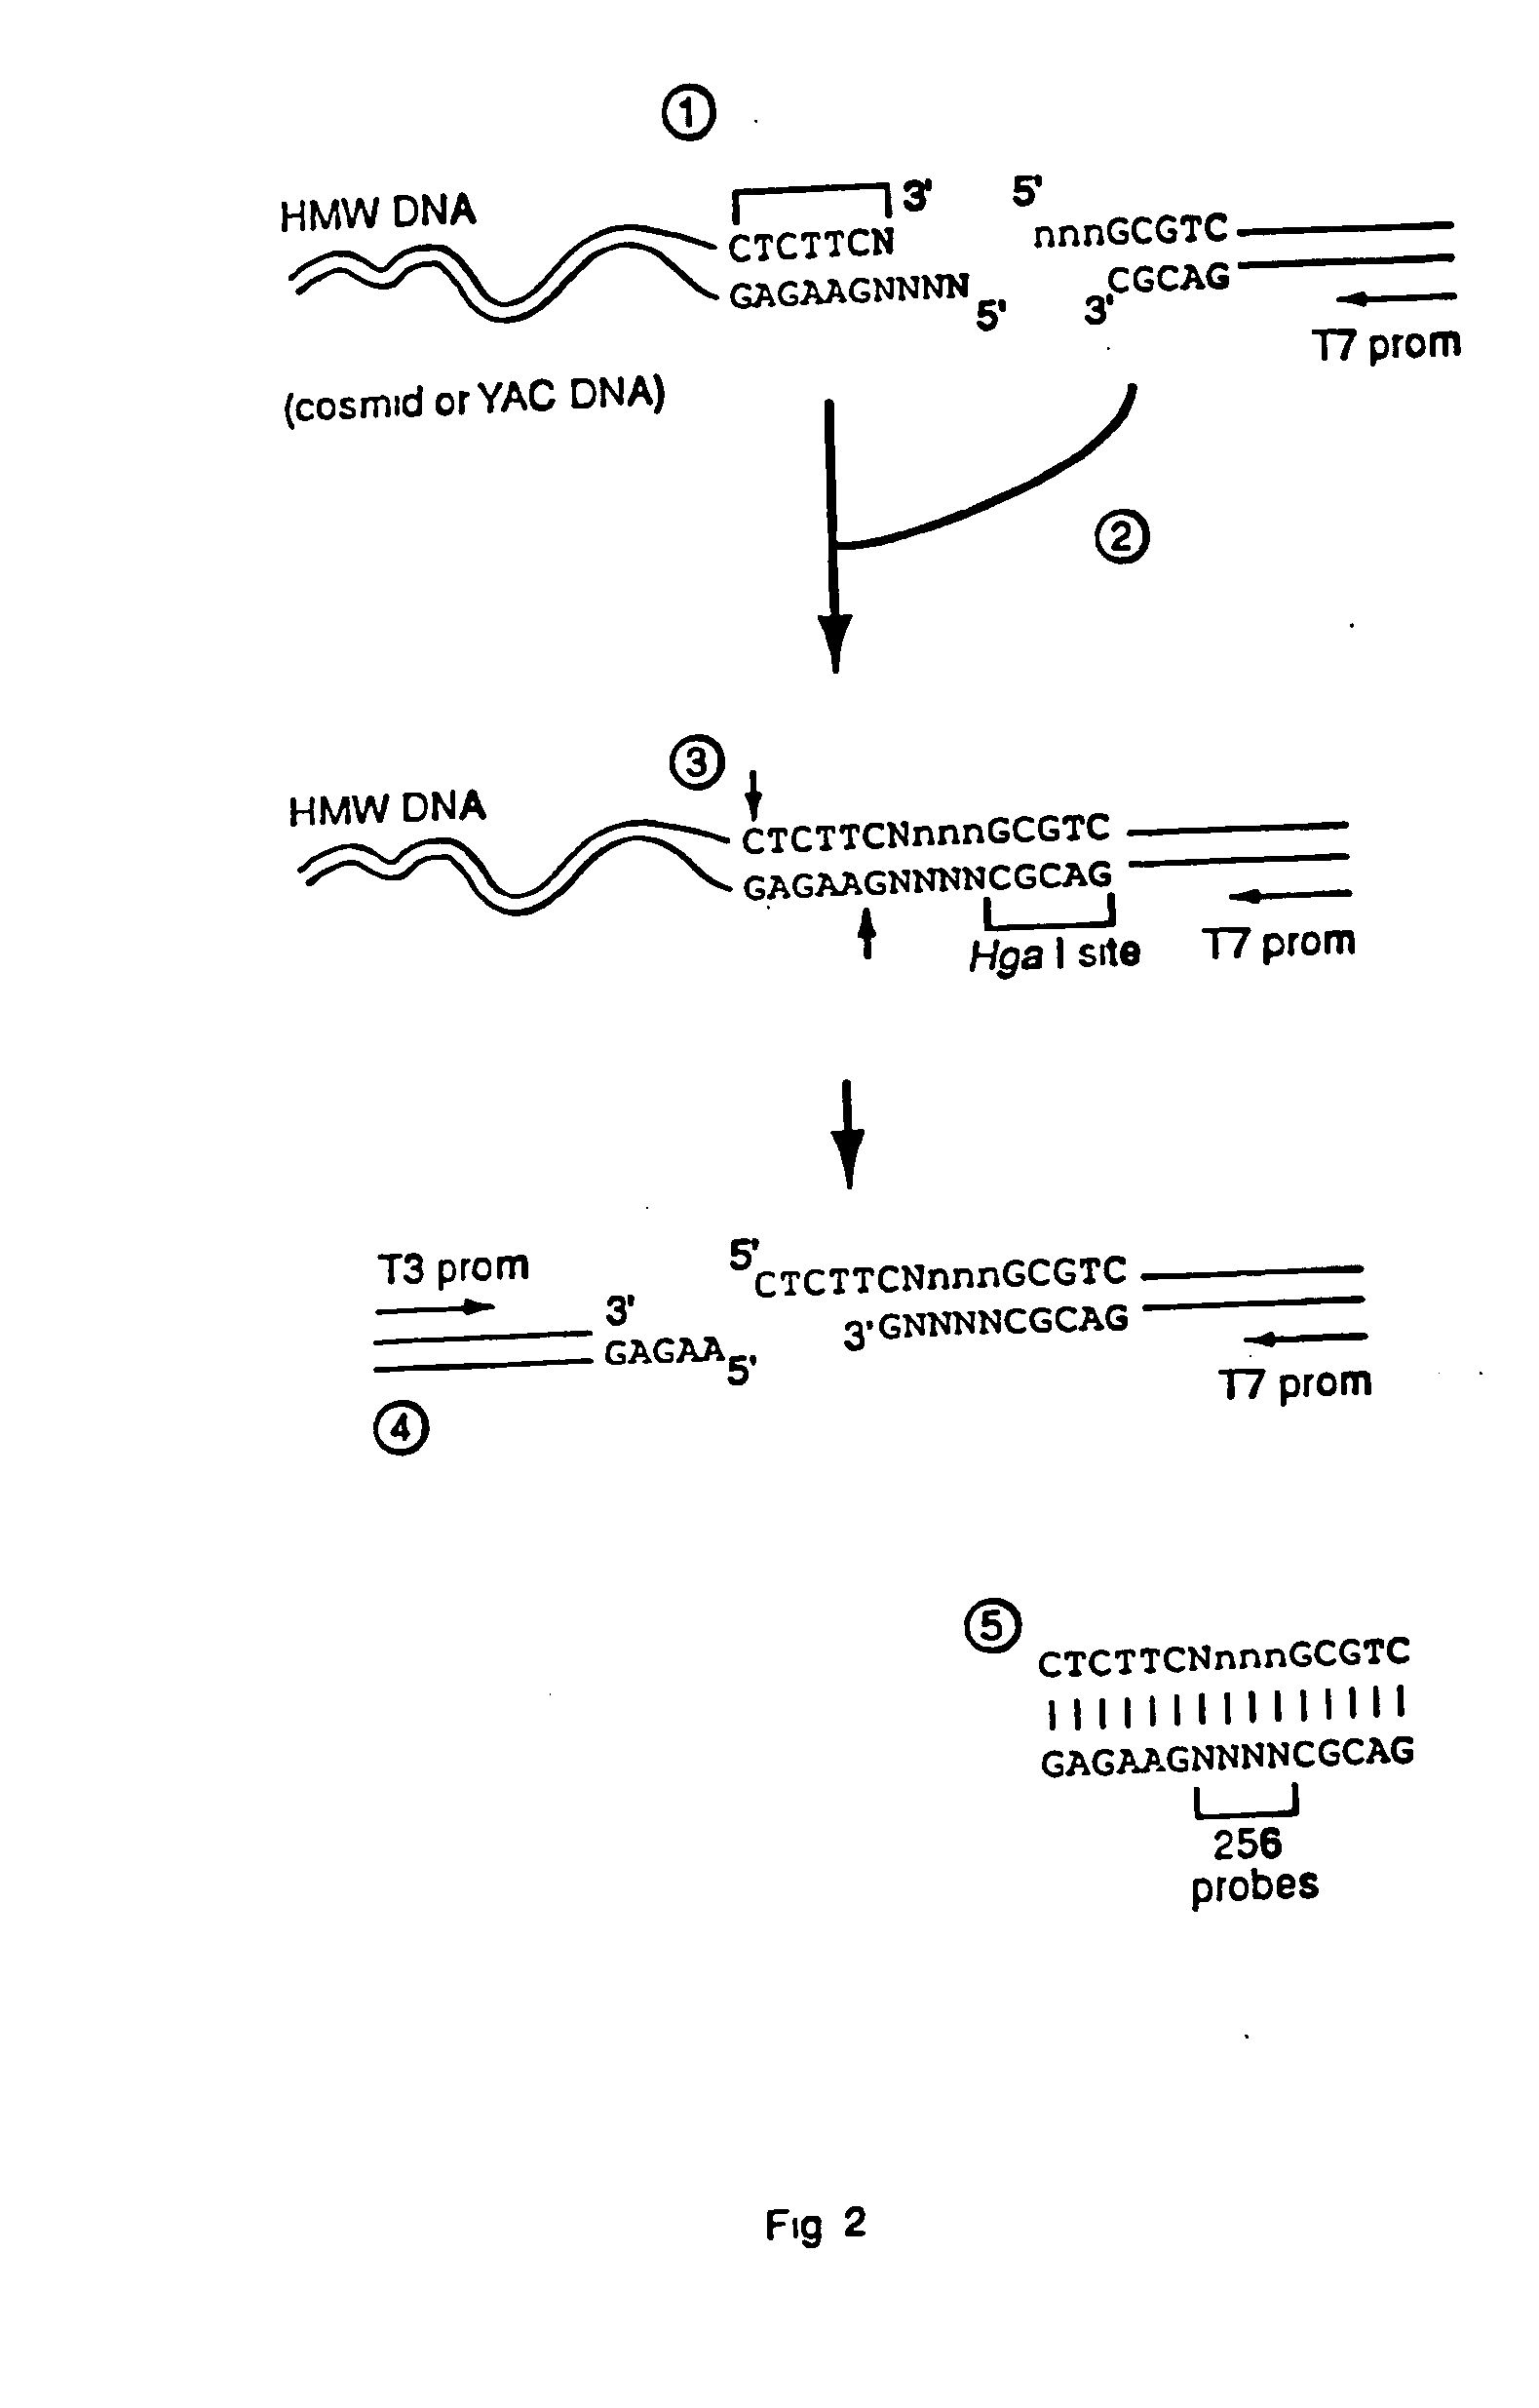 Capturing sequences adjacent to type-IIS restriction sites for genomic library mapping